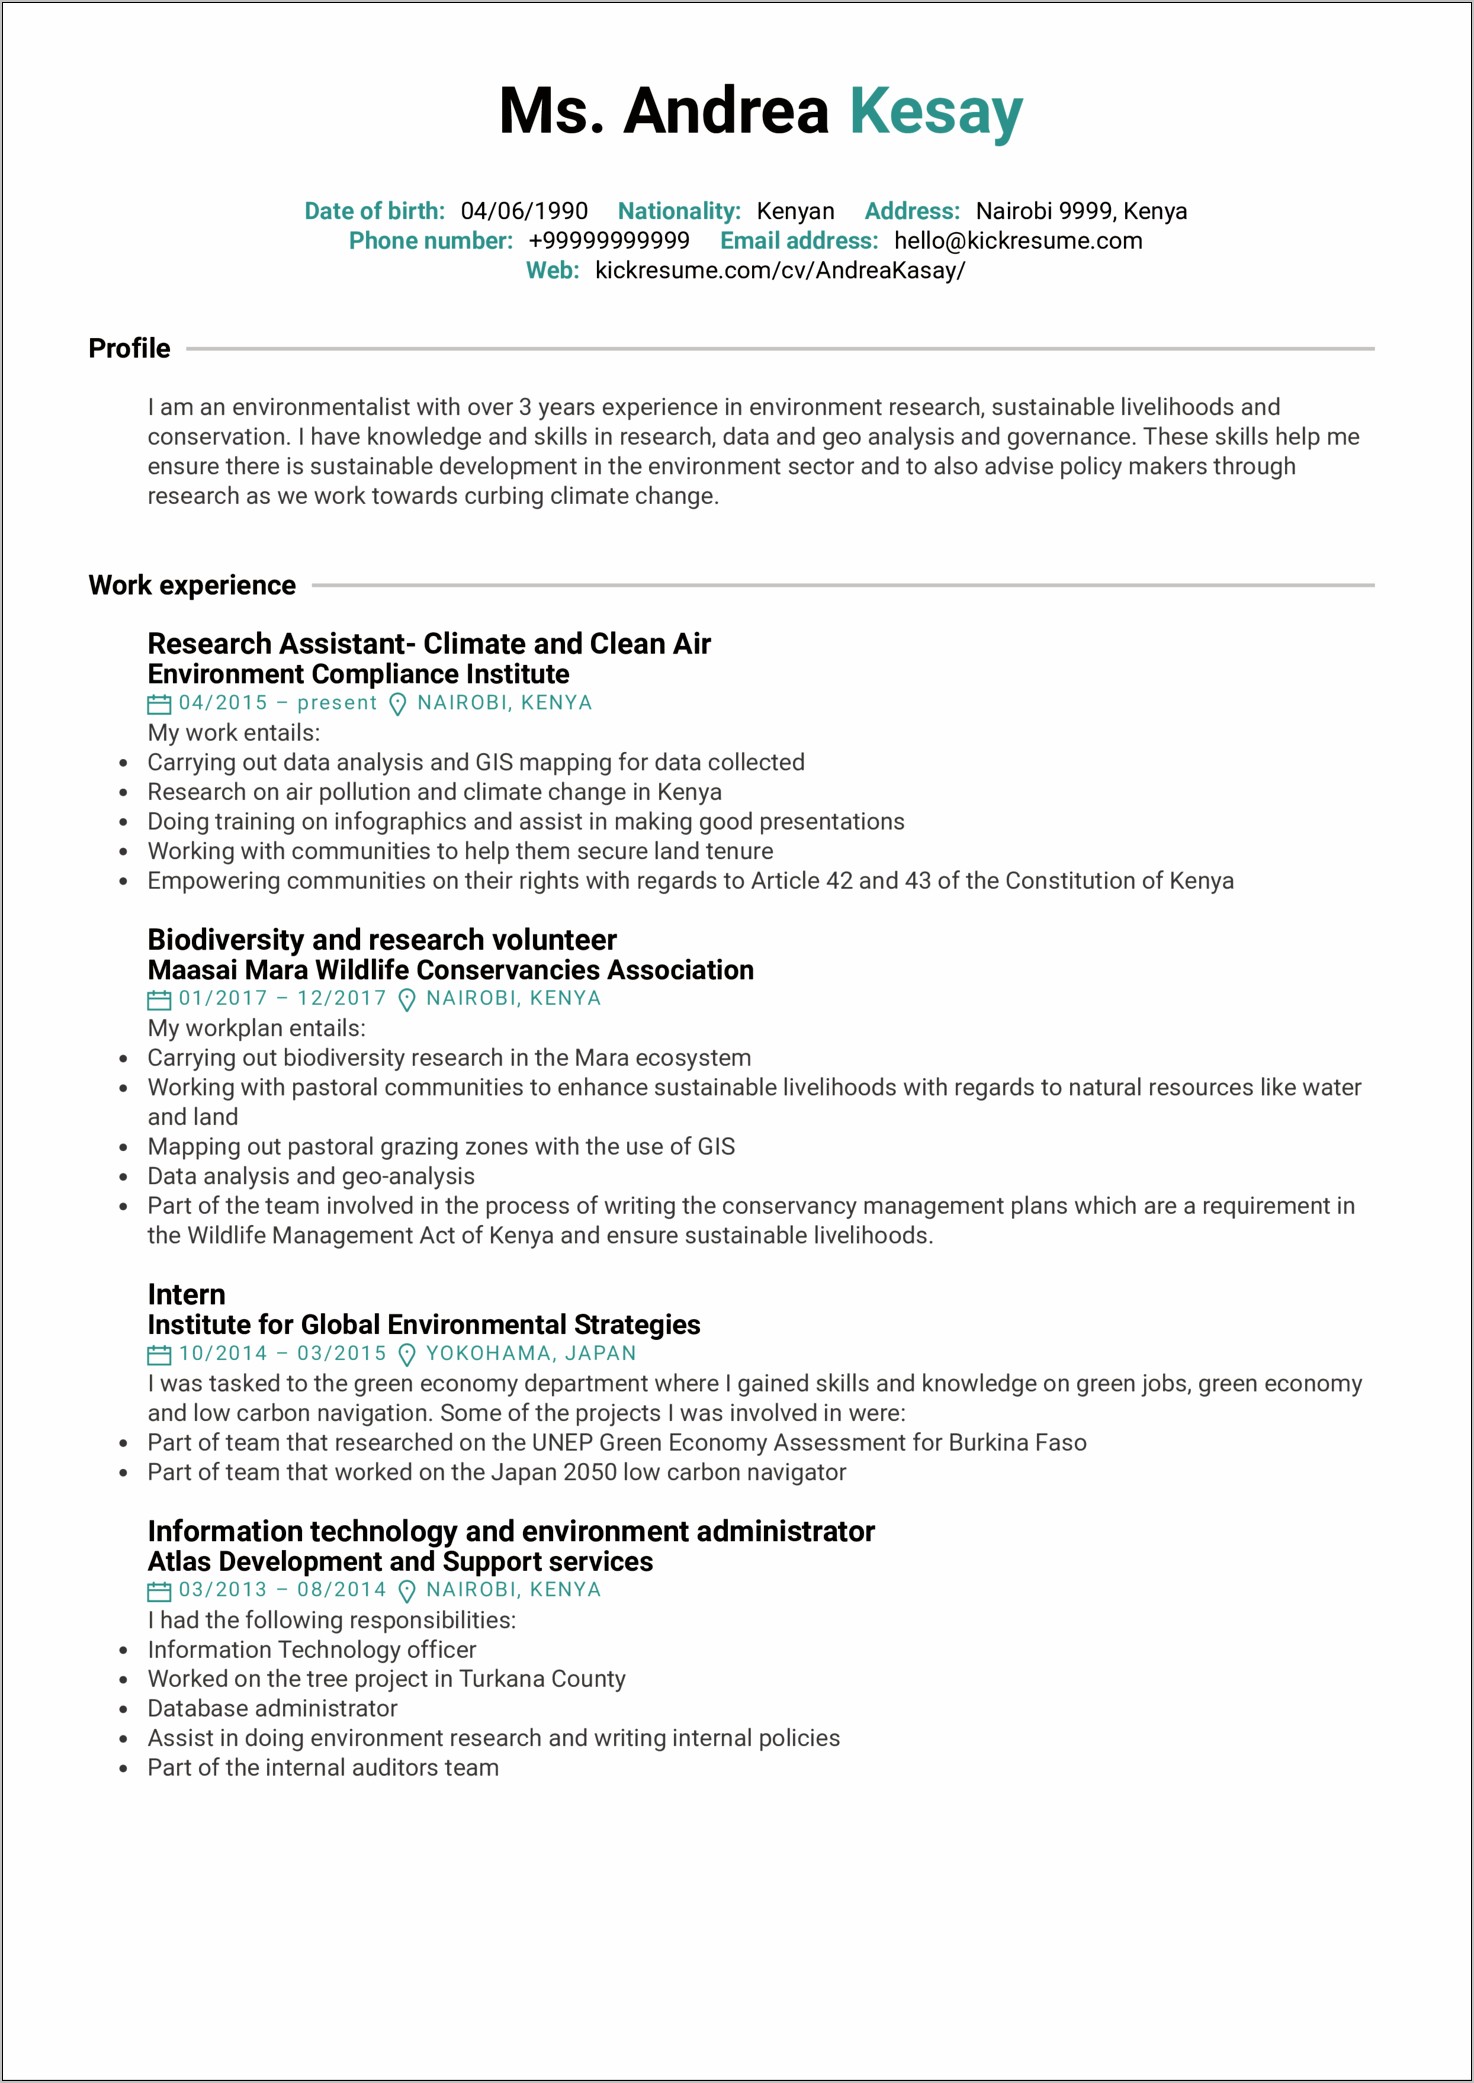 Resume Sample For Student Assistant